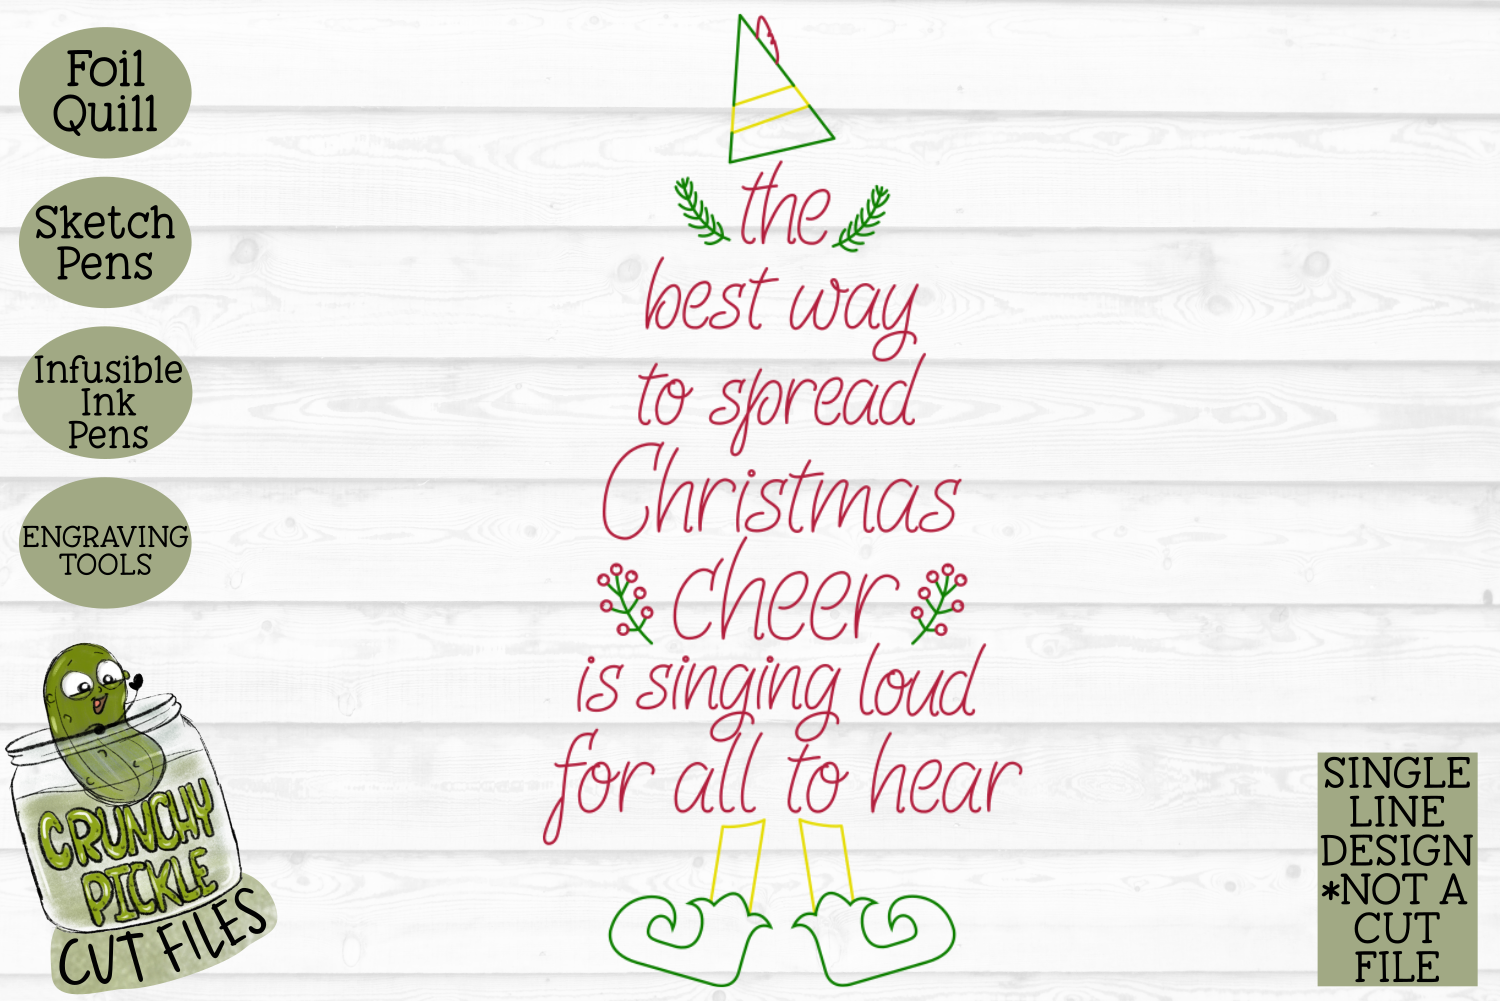 Foil Quill Christmas Card Christmas Cheer Elf Phrase By Crunchy Pickle Thehungryjpeg Com